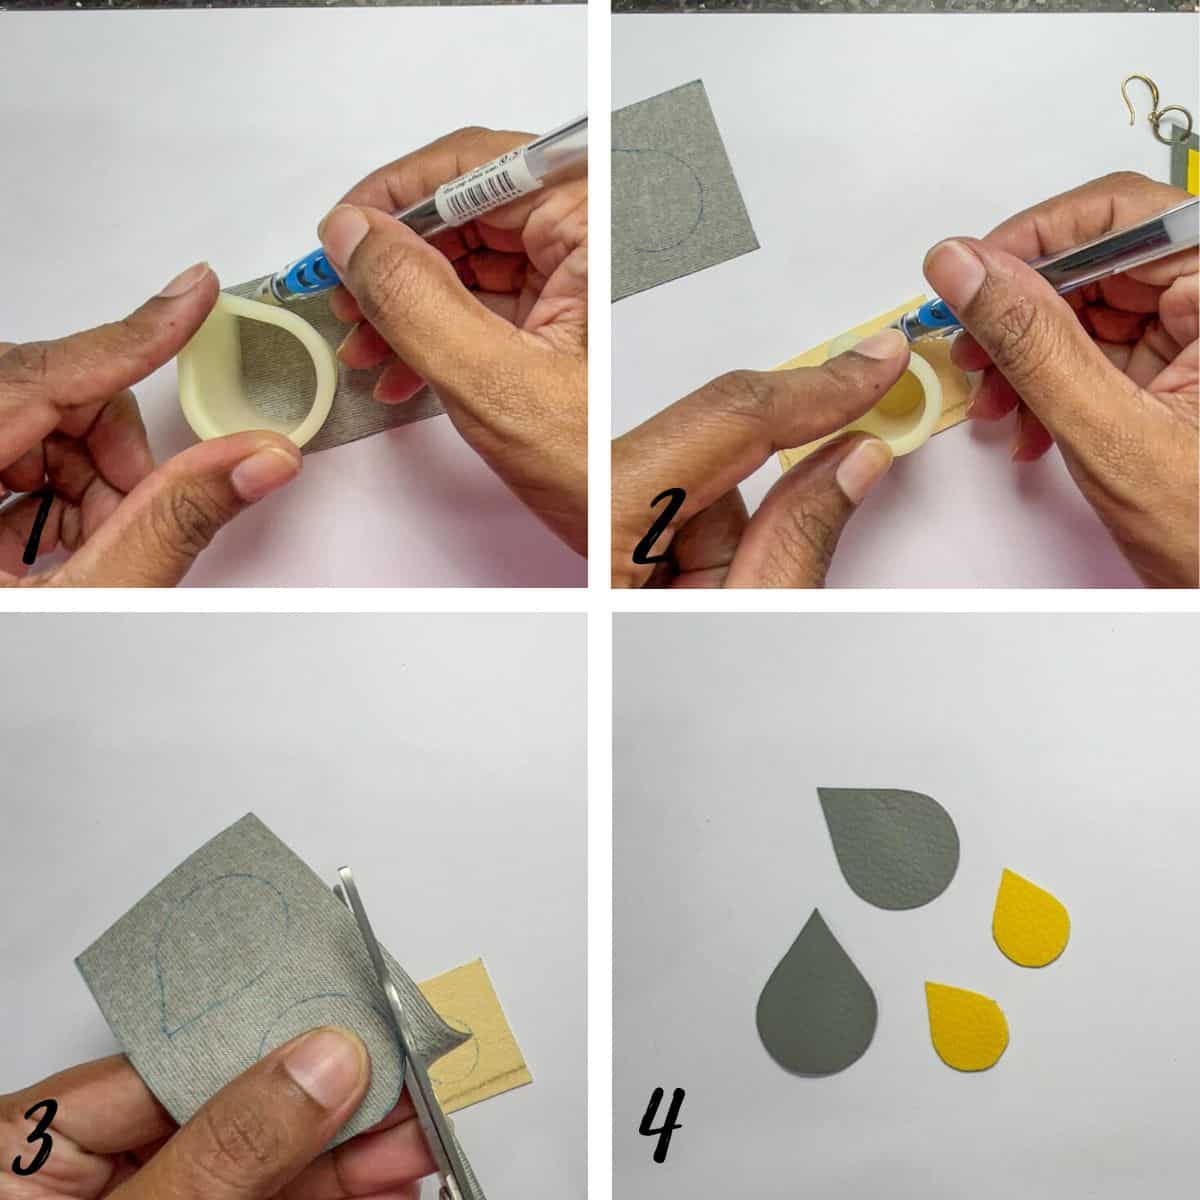 A poster of 4 images showing how to cut leather.